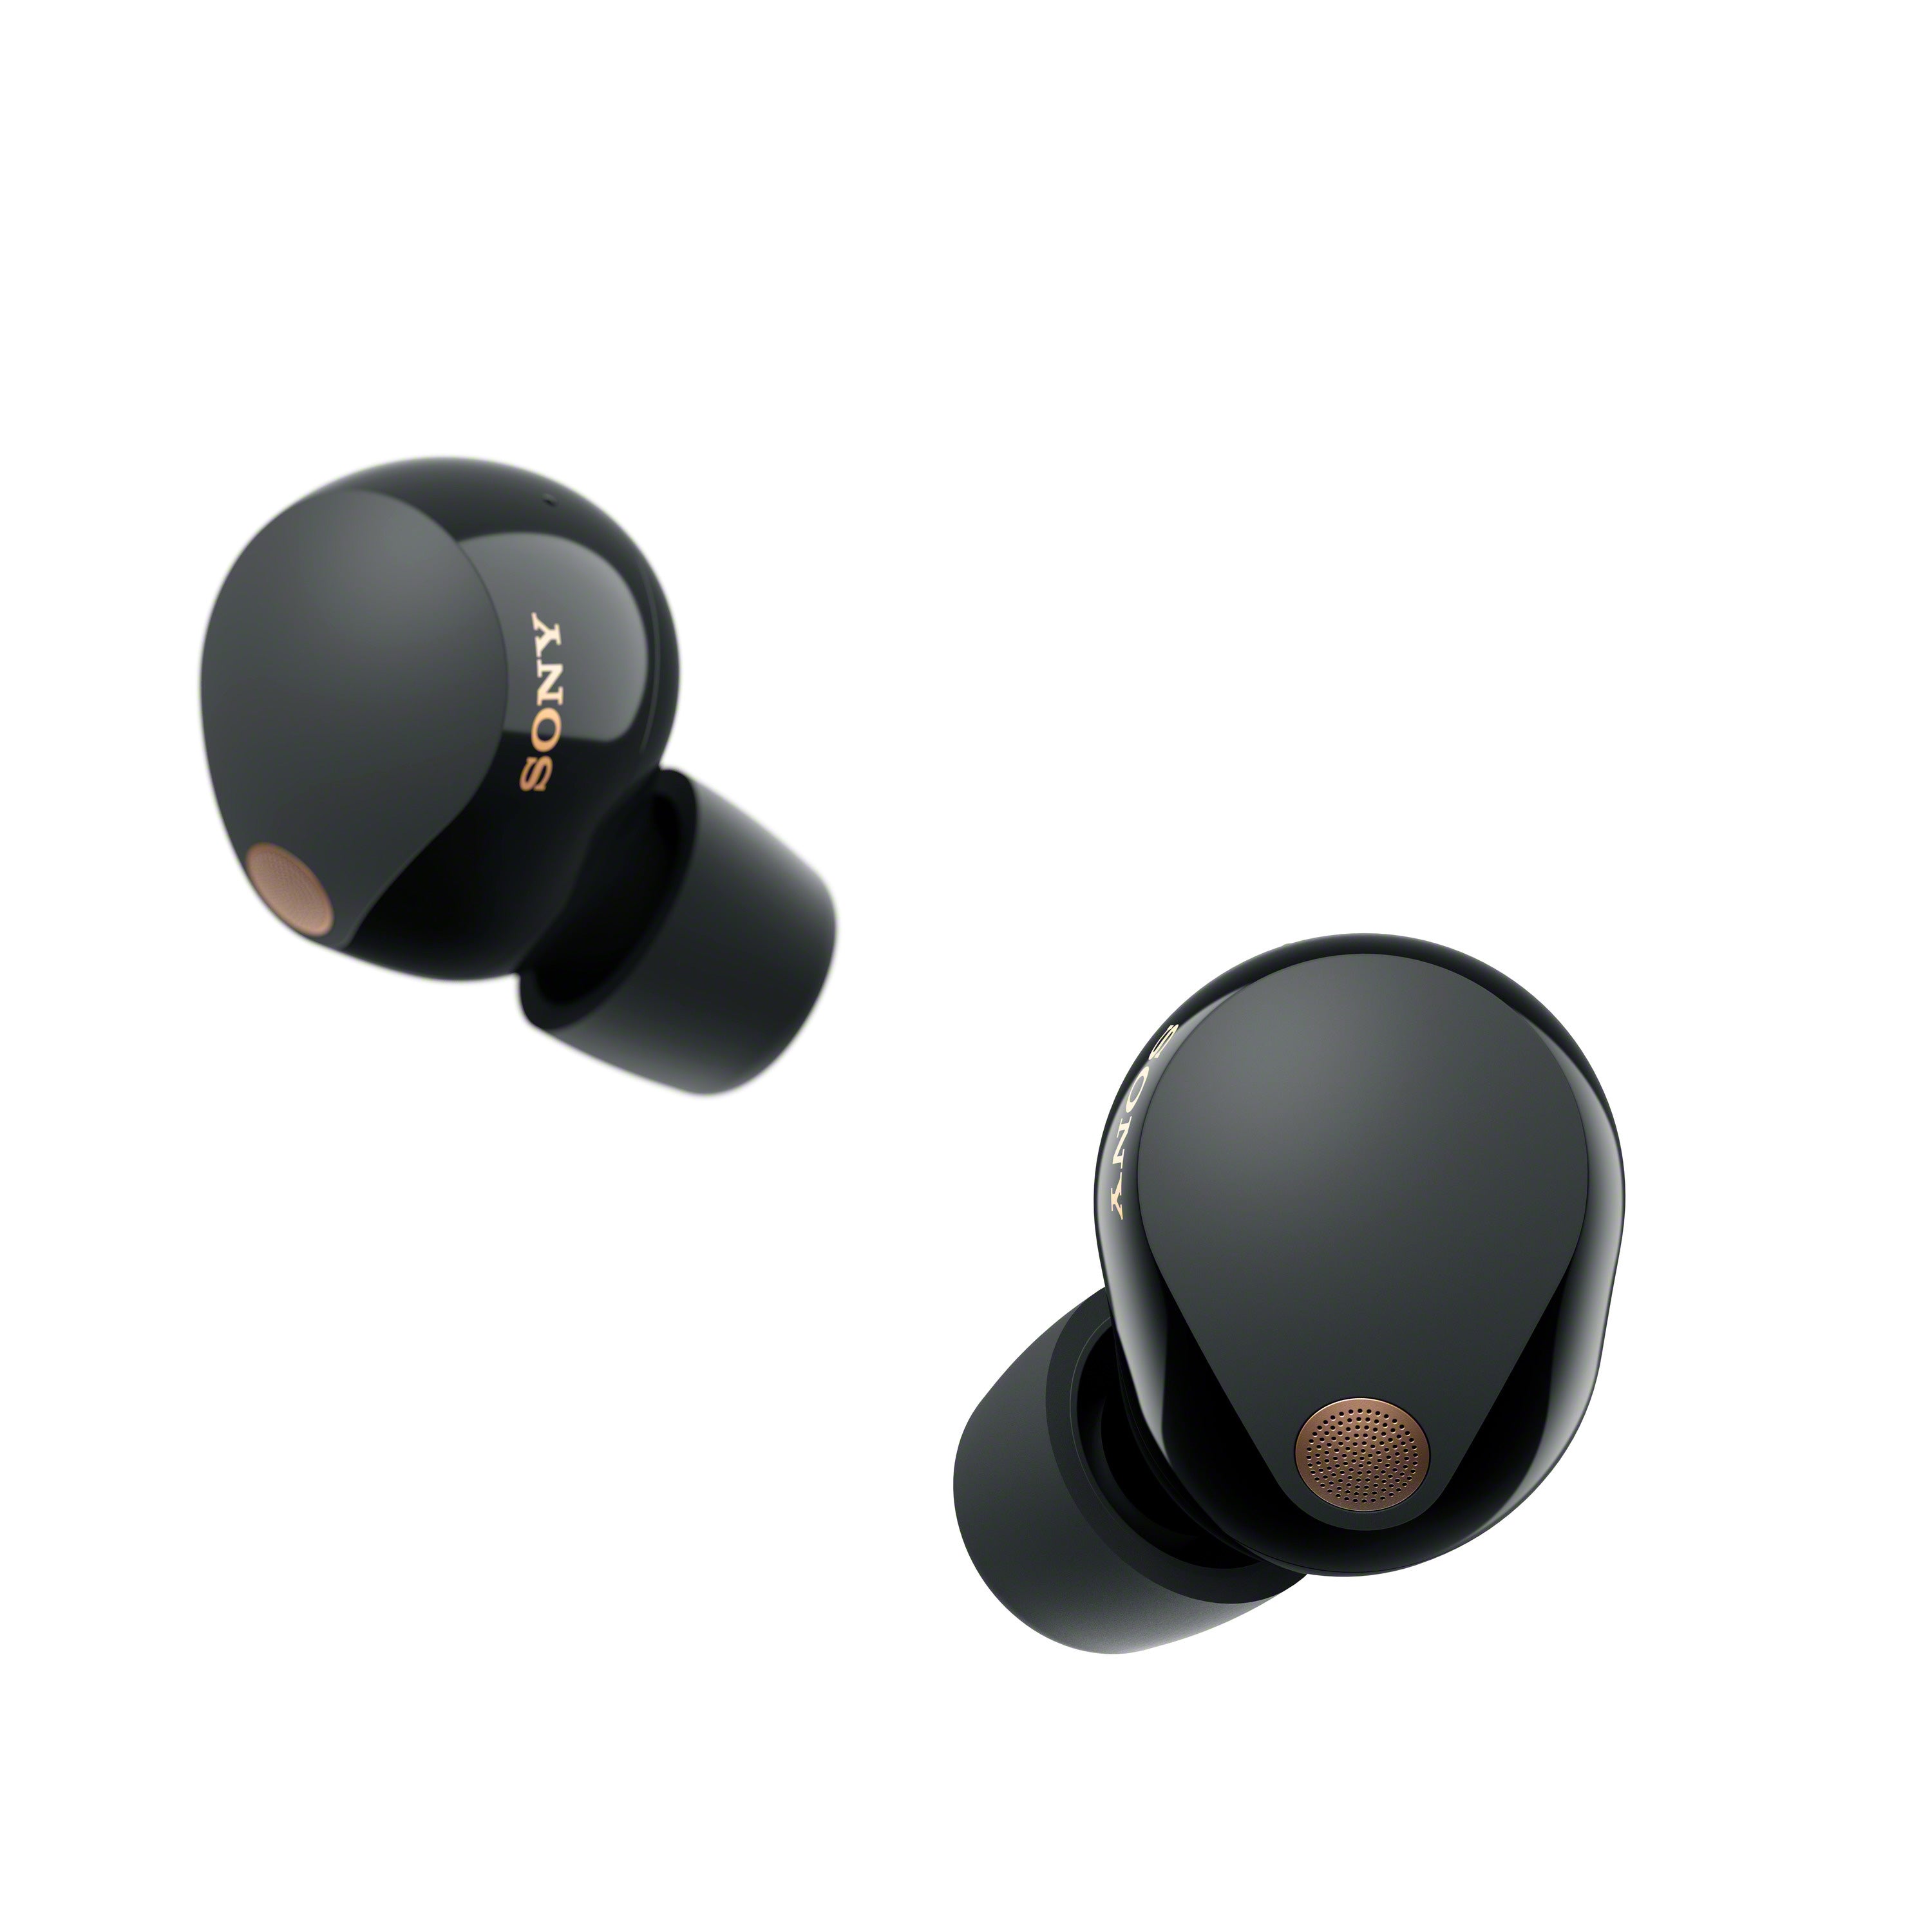 Huawei's latest earbuds continually analyse your ears for an optimised  listening experience